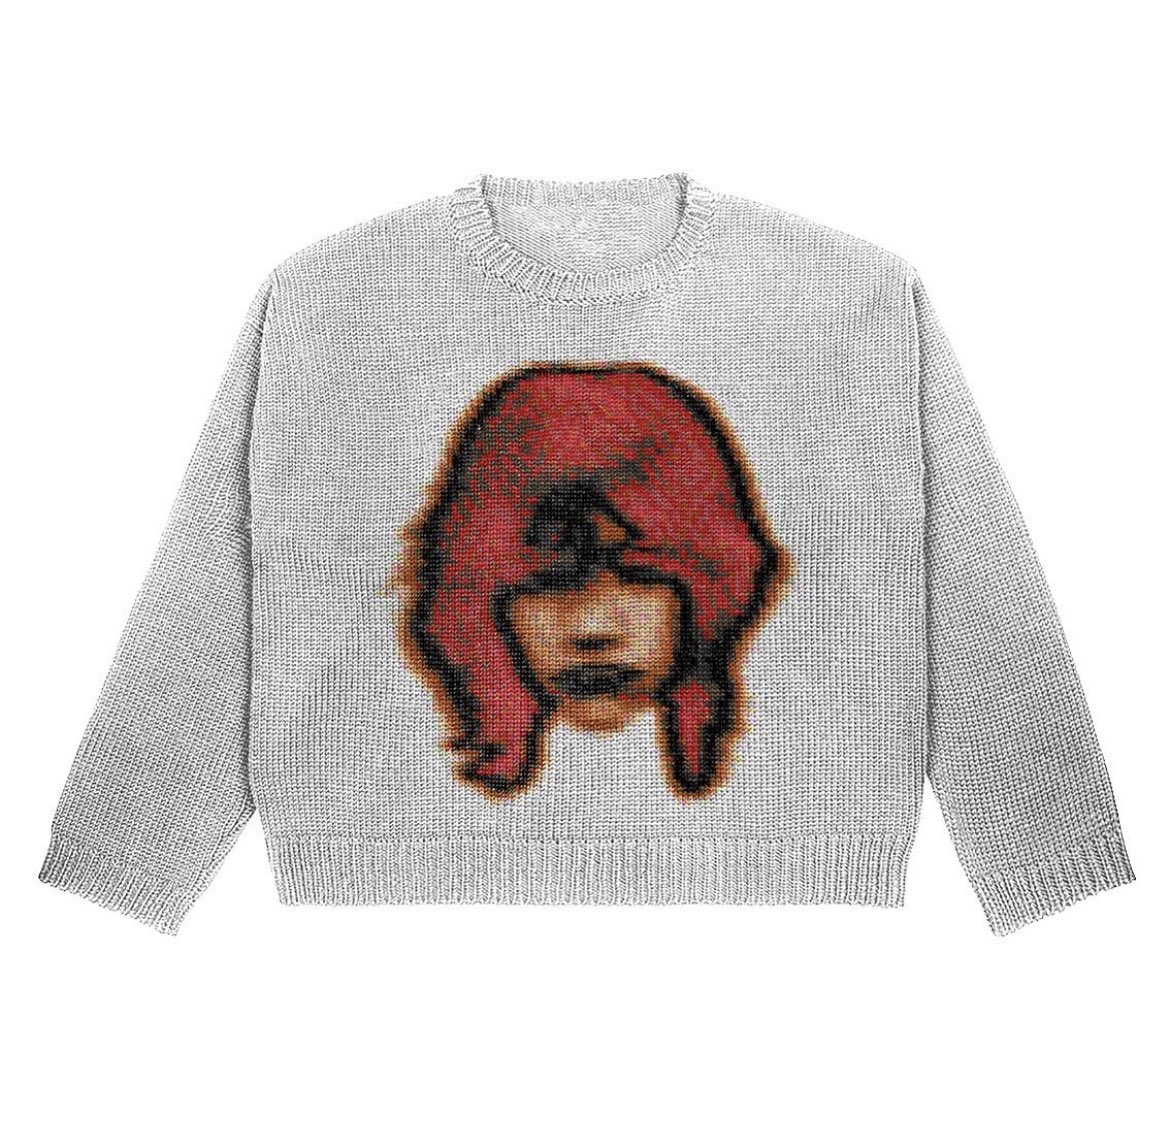 Refugee Knitted Sweater 12/25/2021 PRE-ORDER OPEN 11/25/2021